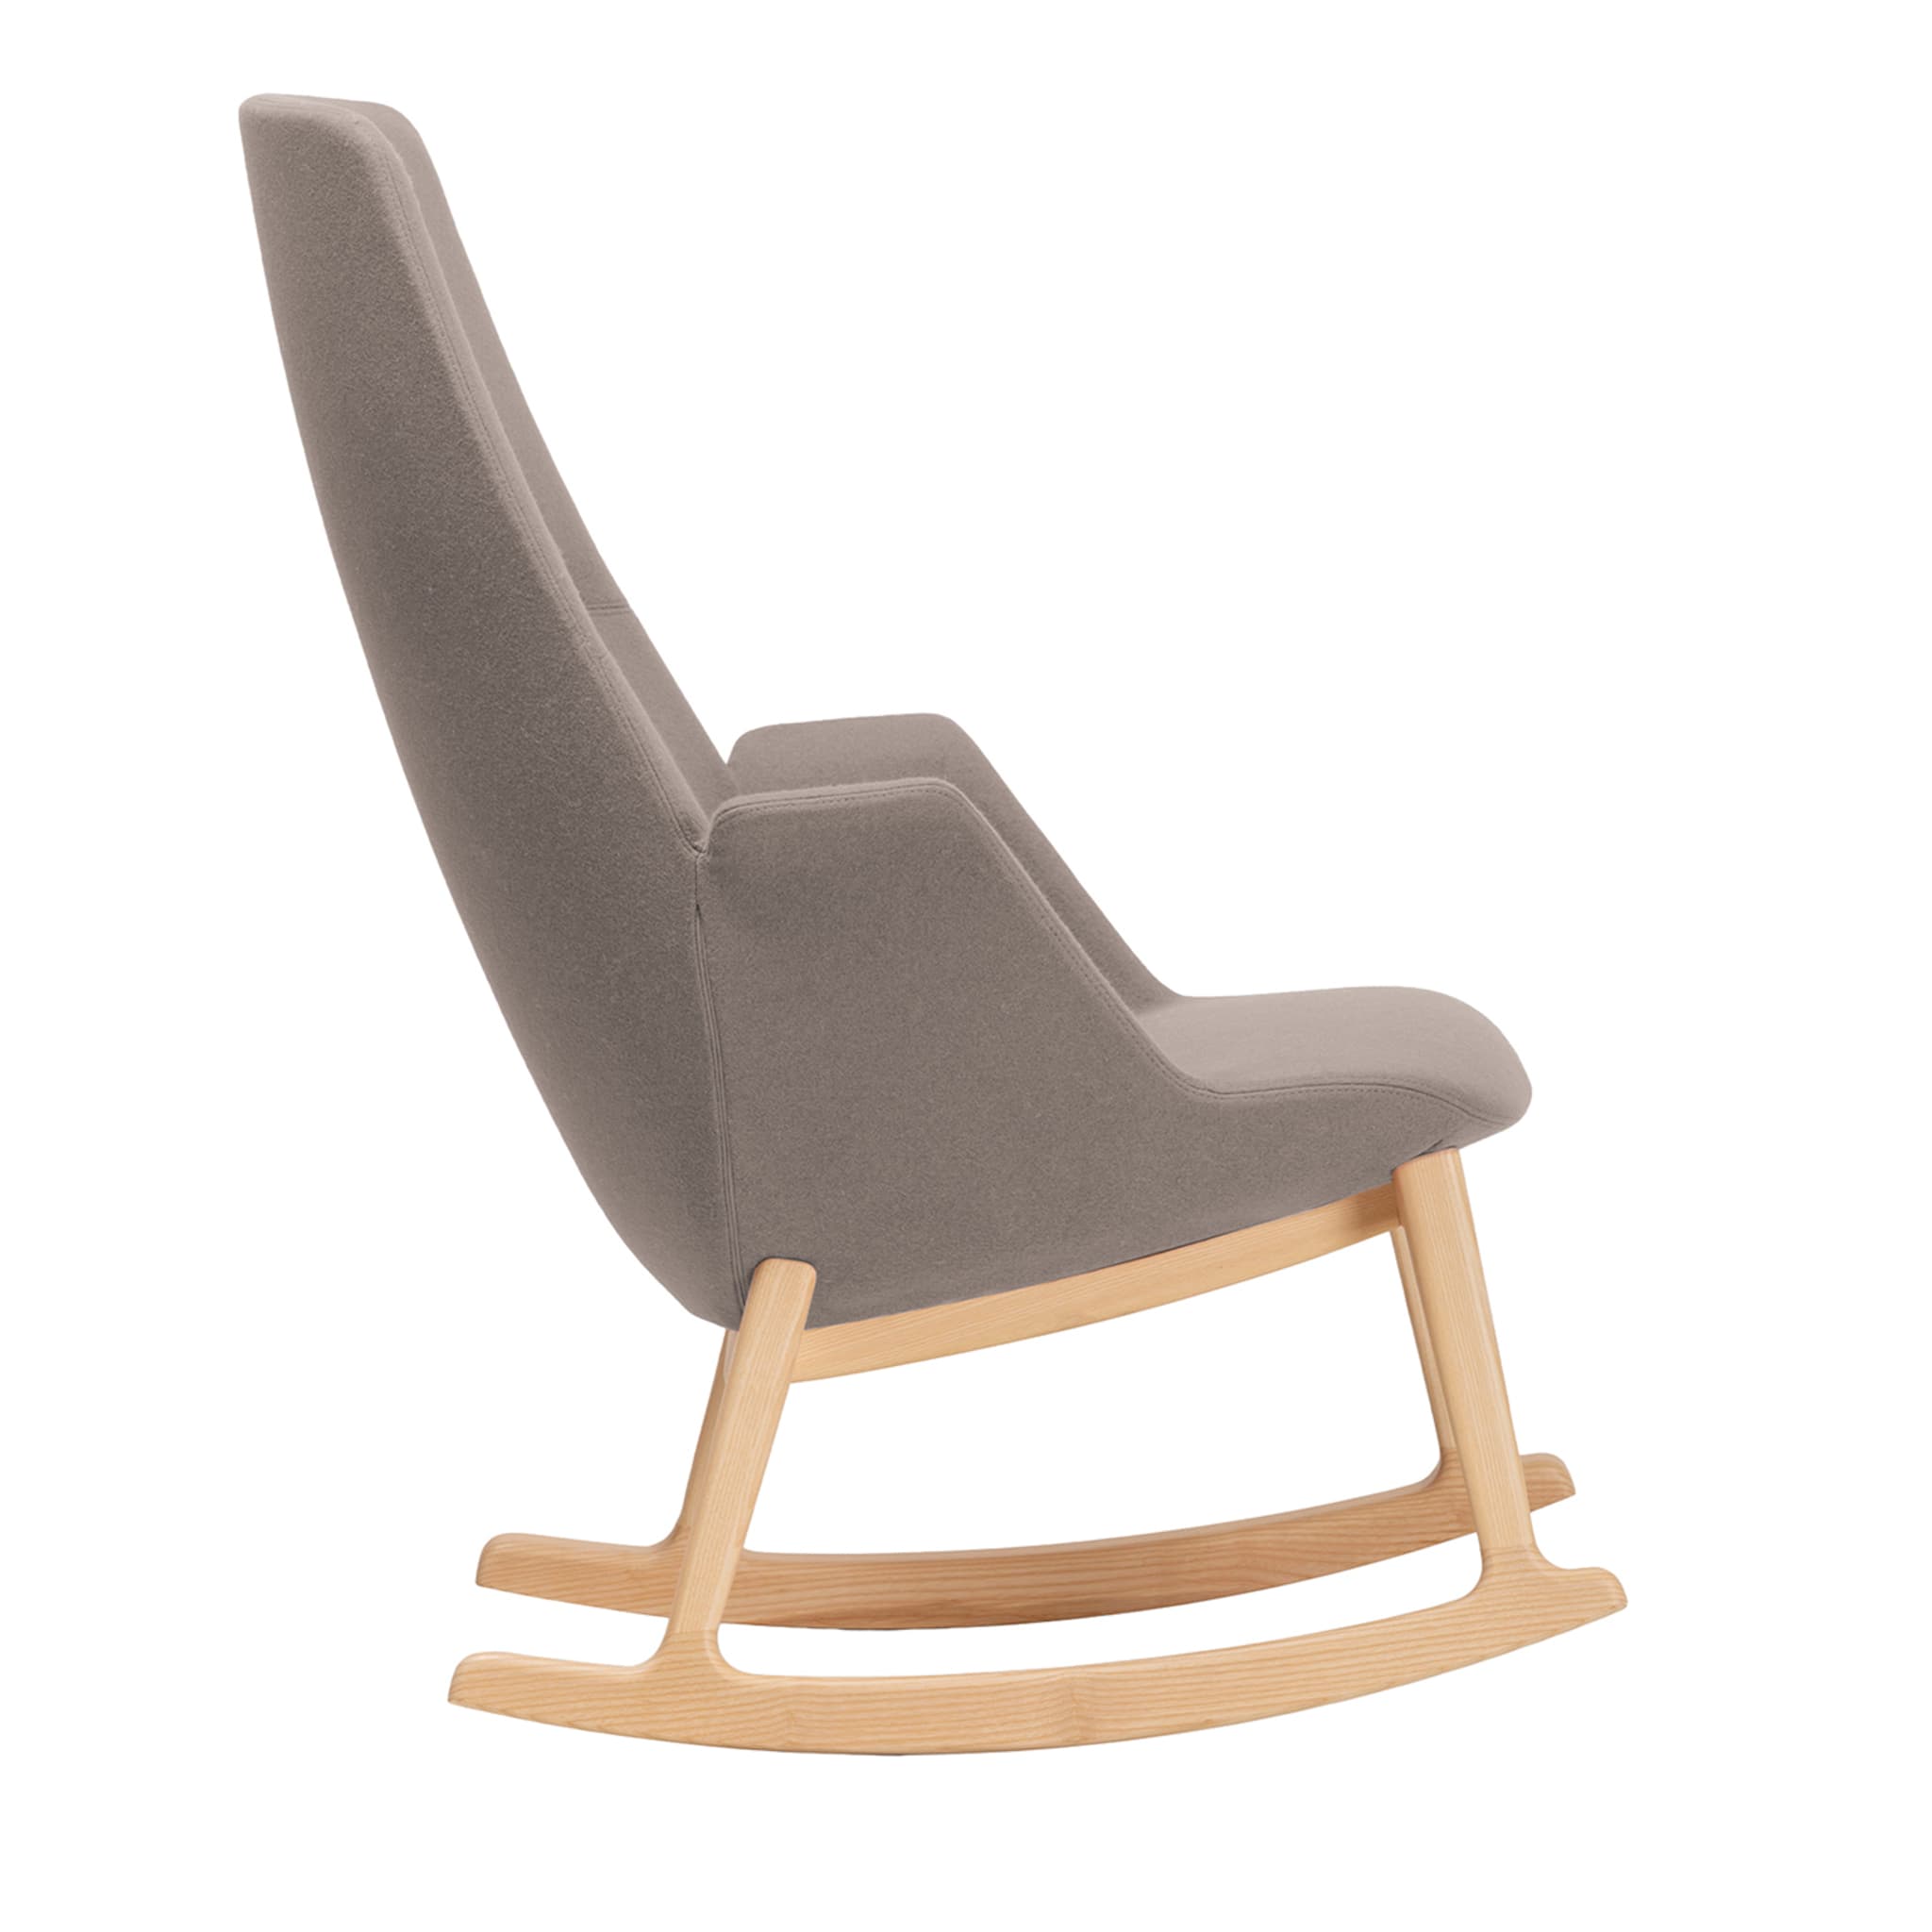 Hive Rocking Chair by Camira - Main view